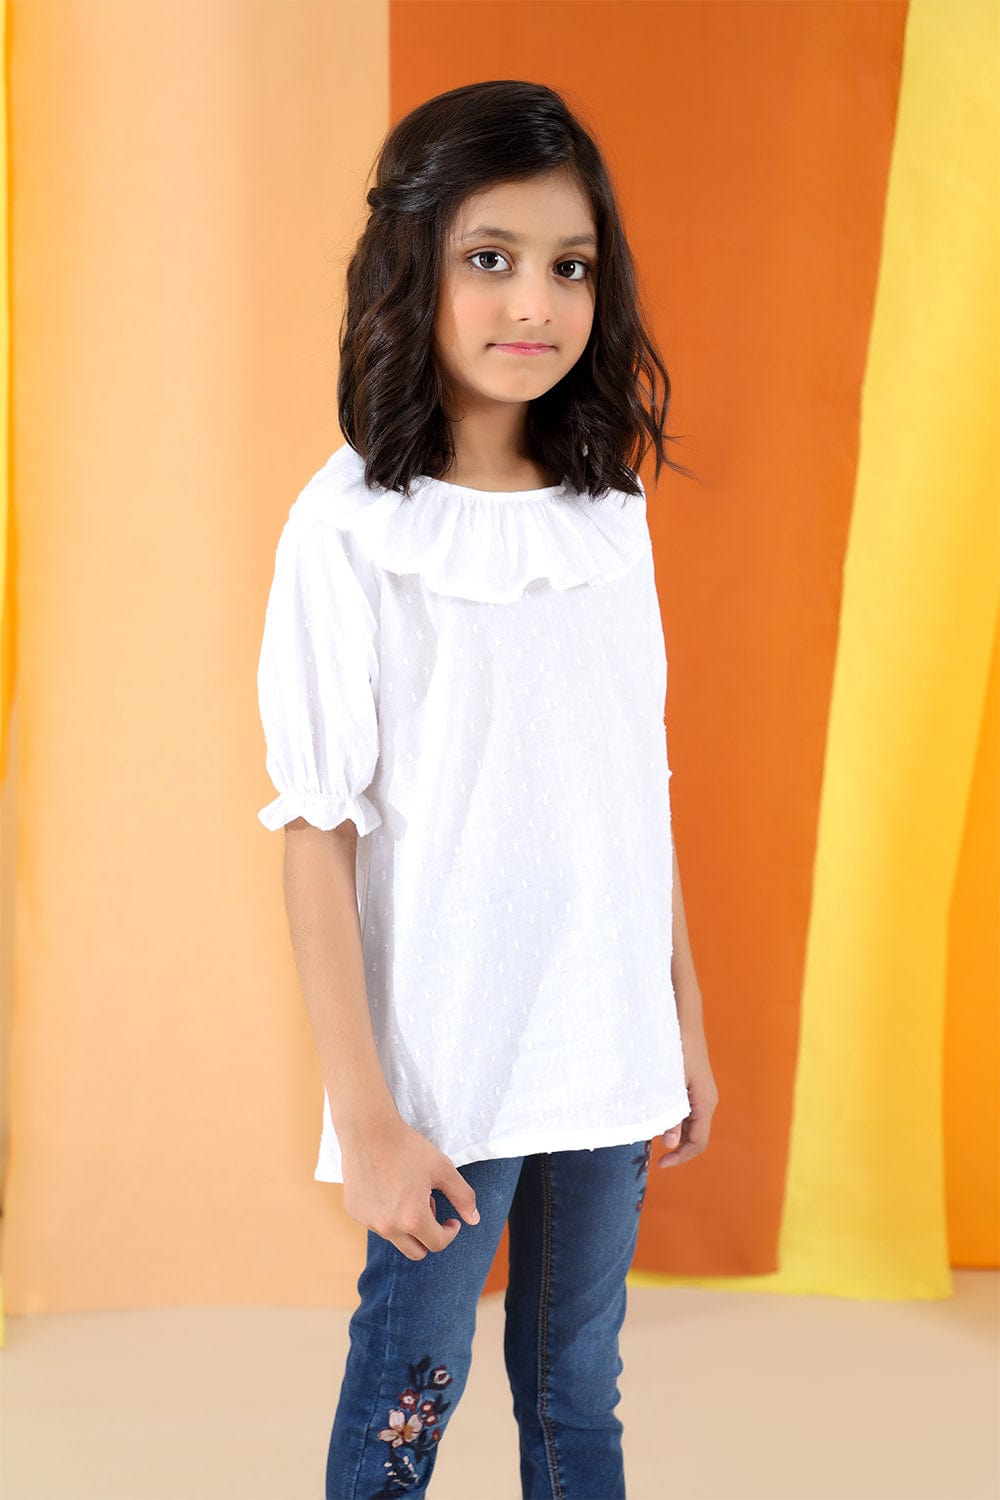 Hope Not Out by Shahid Afridi Girls Woven Dresses Girls Embroidered Frill Top